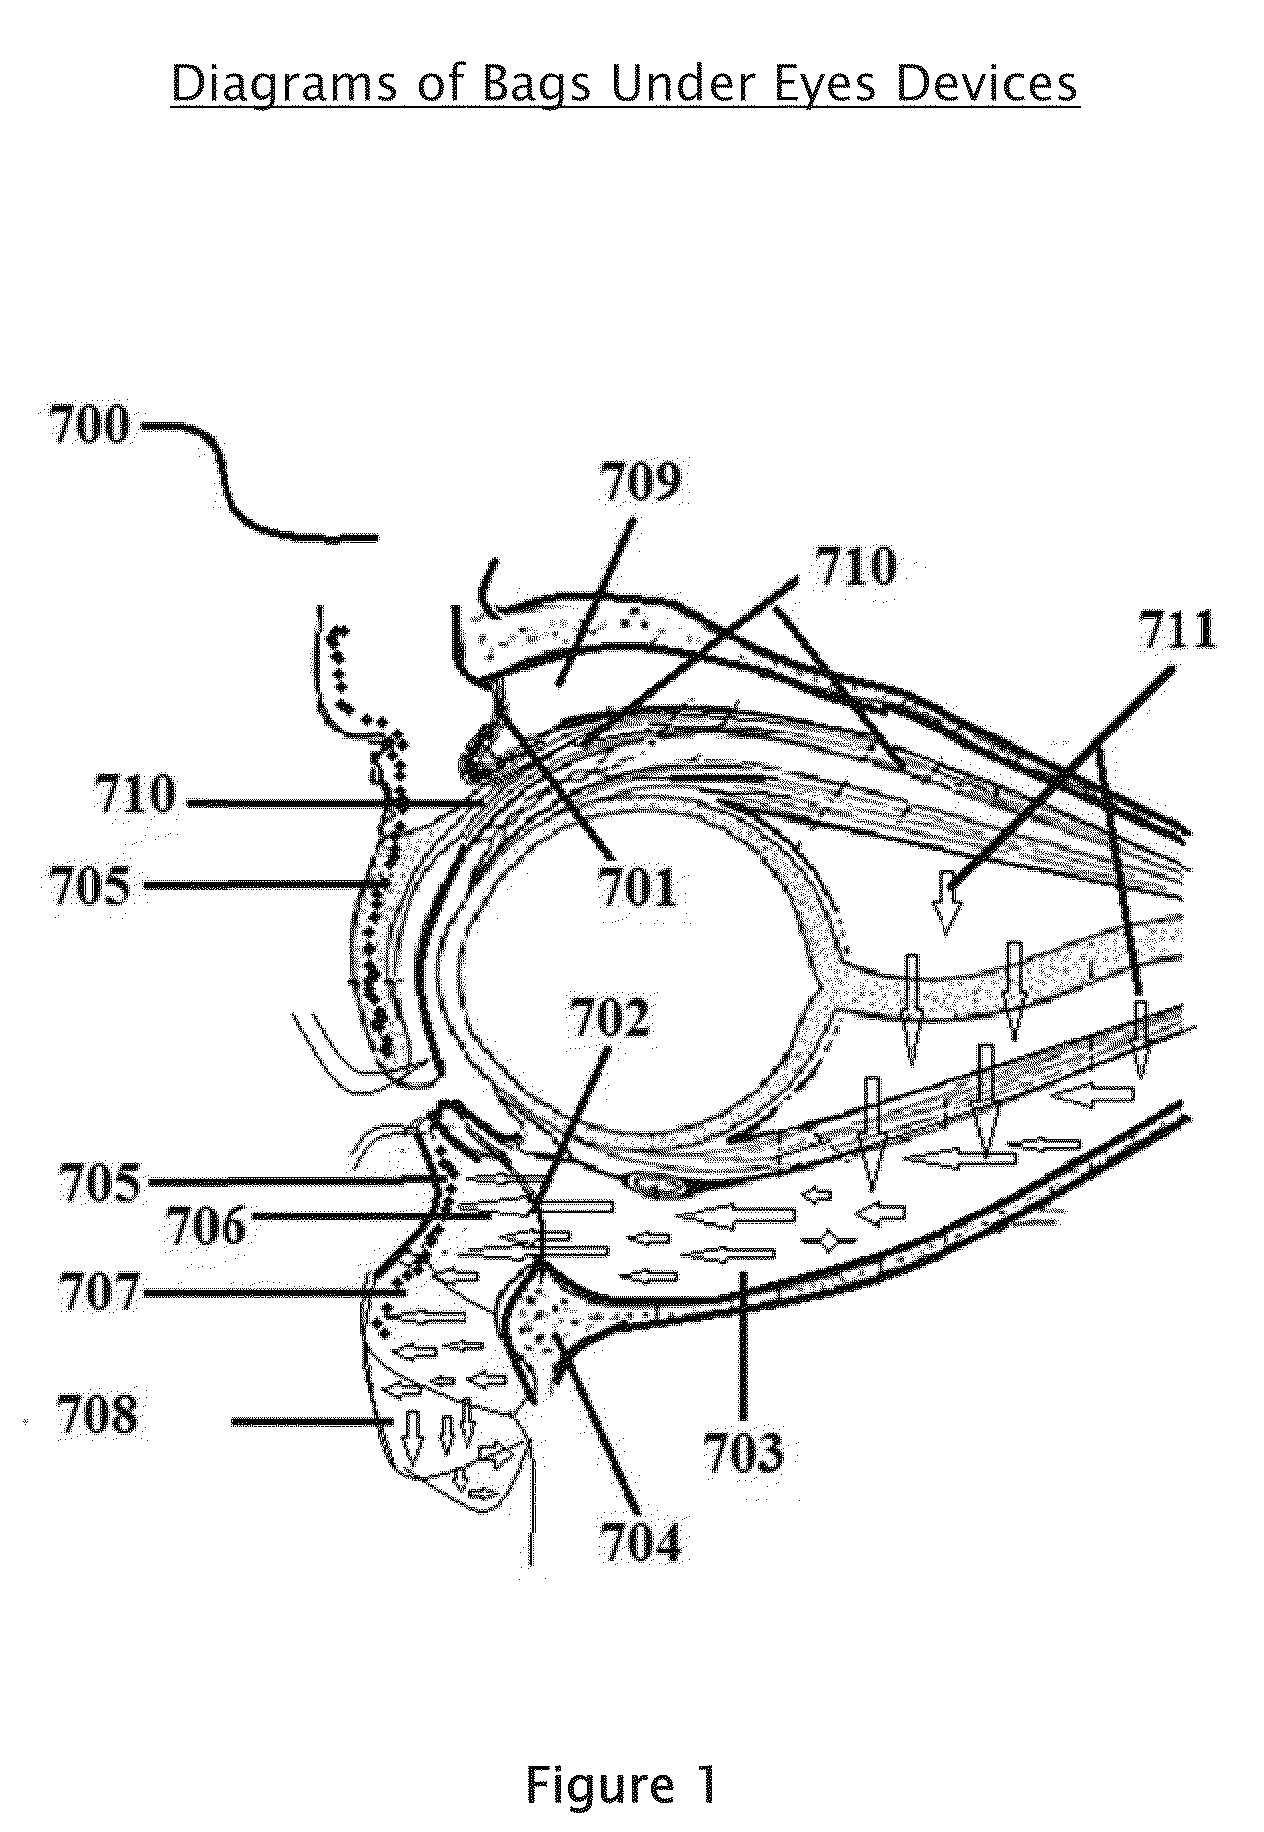 Apparatus and system for treatment and prevention of bags under eyes